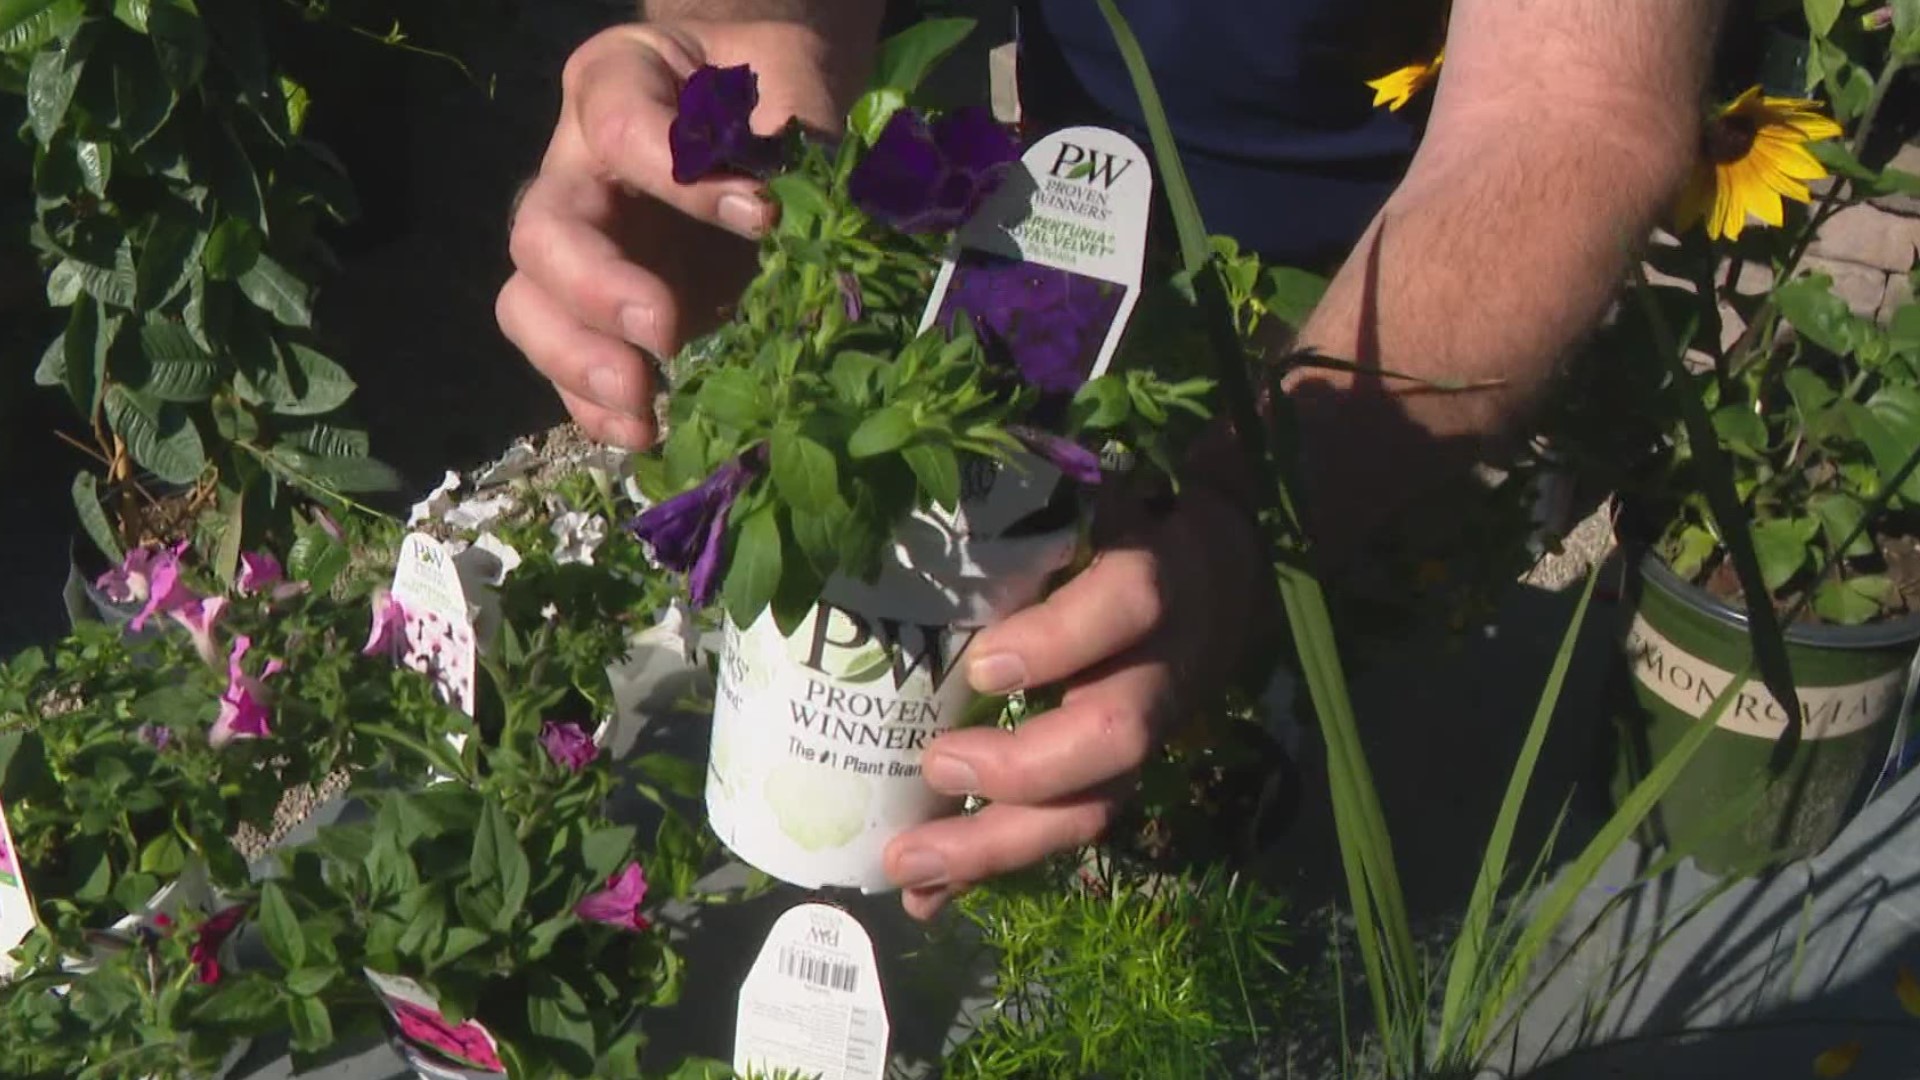 The final frost is likely behind us so Pat provides plenty of ideas for planting you start today.